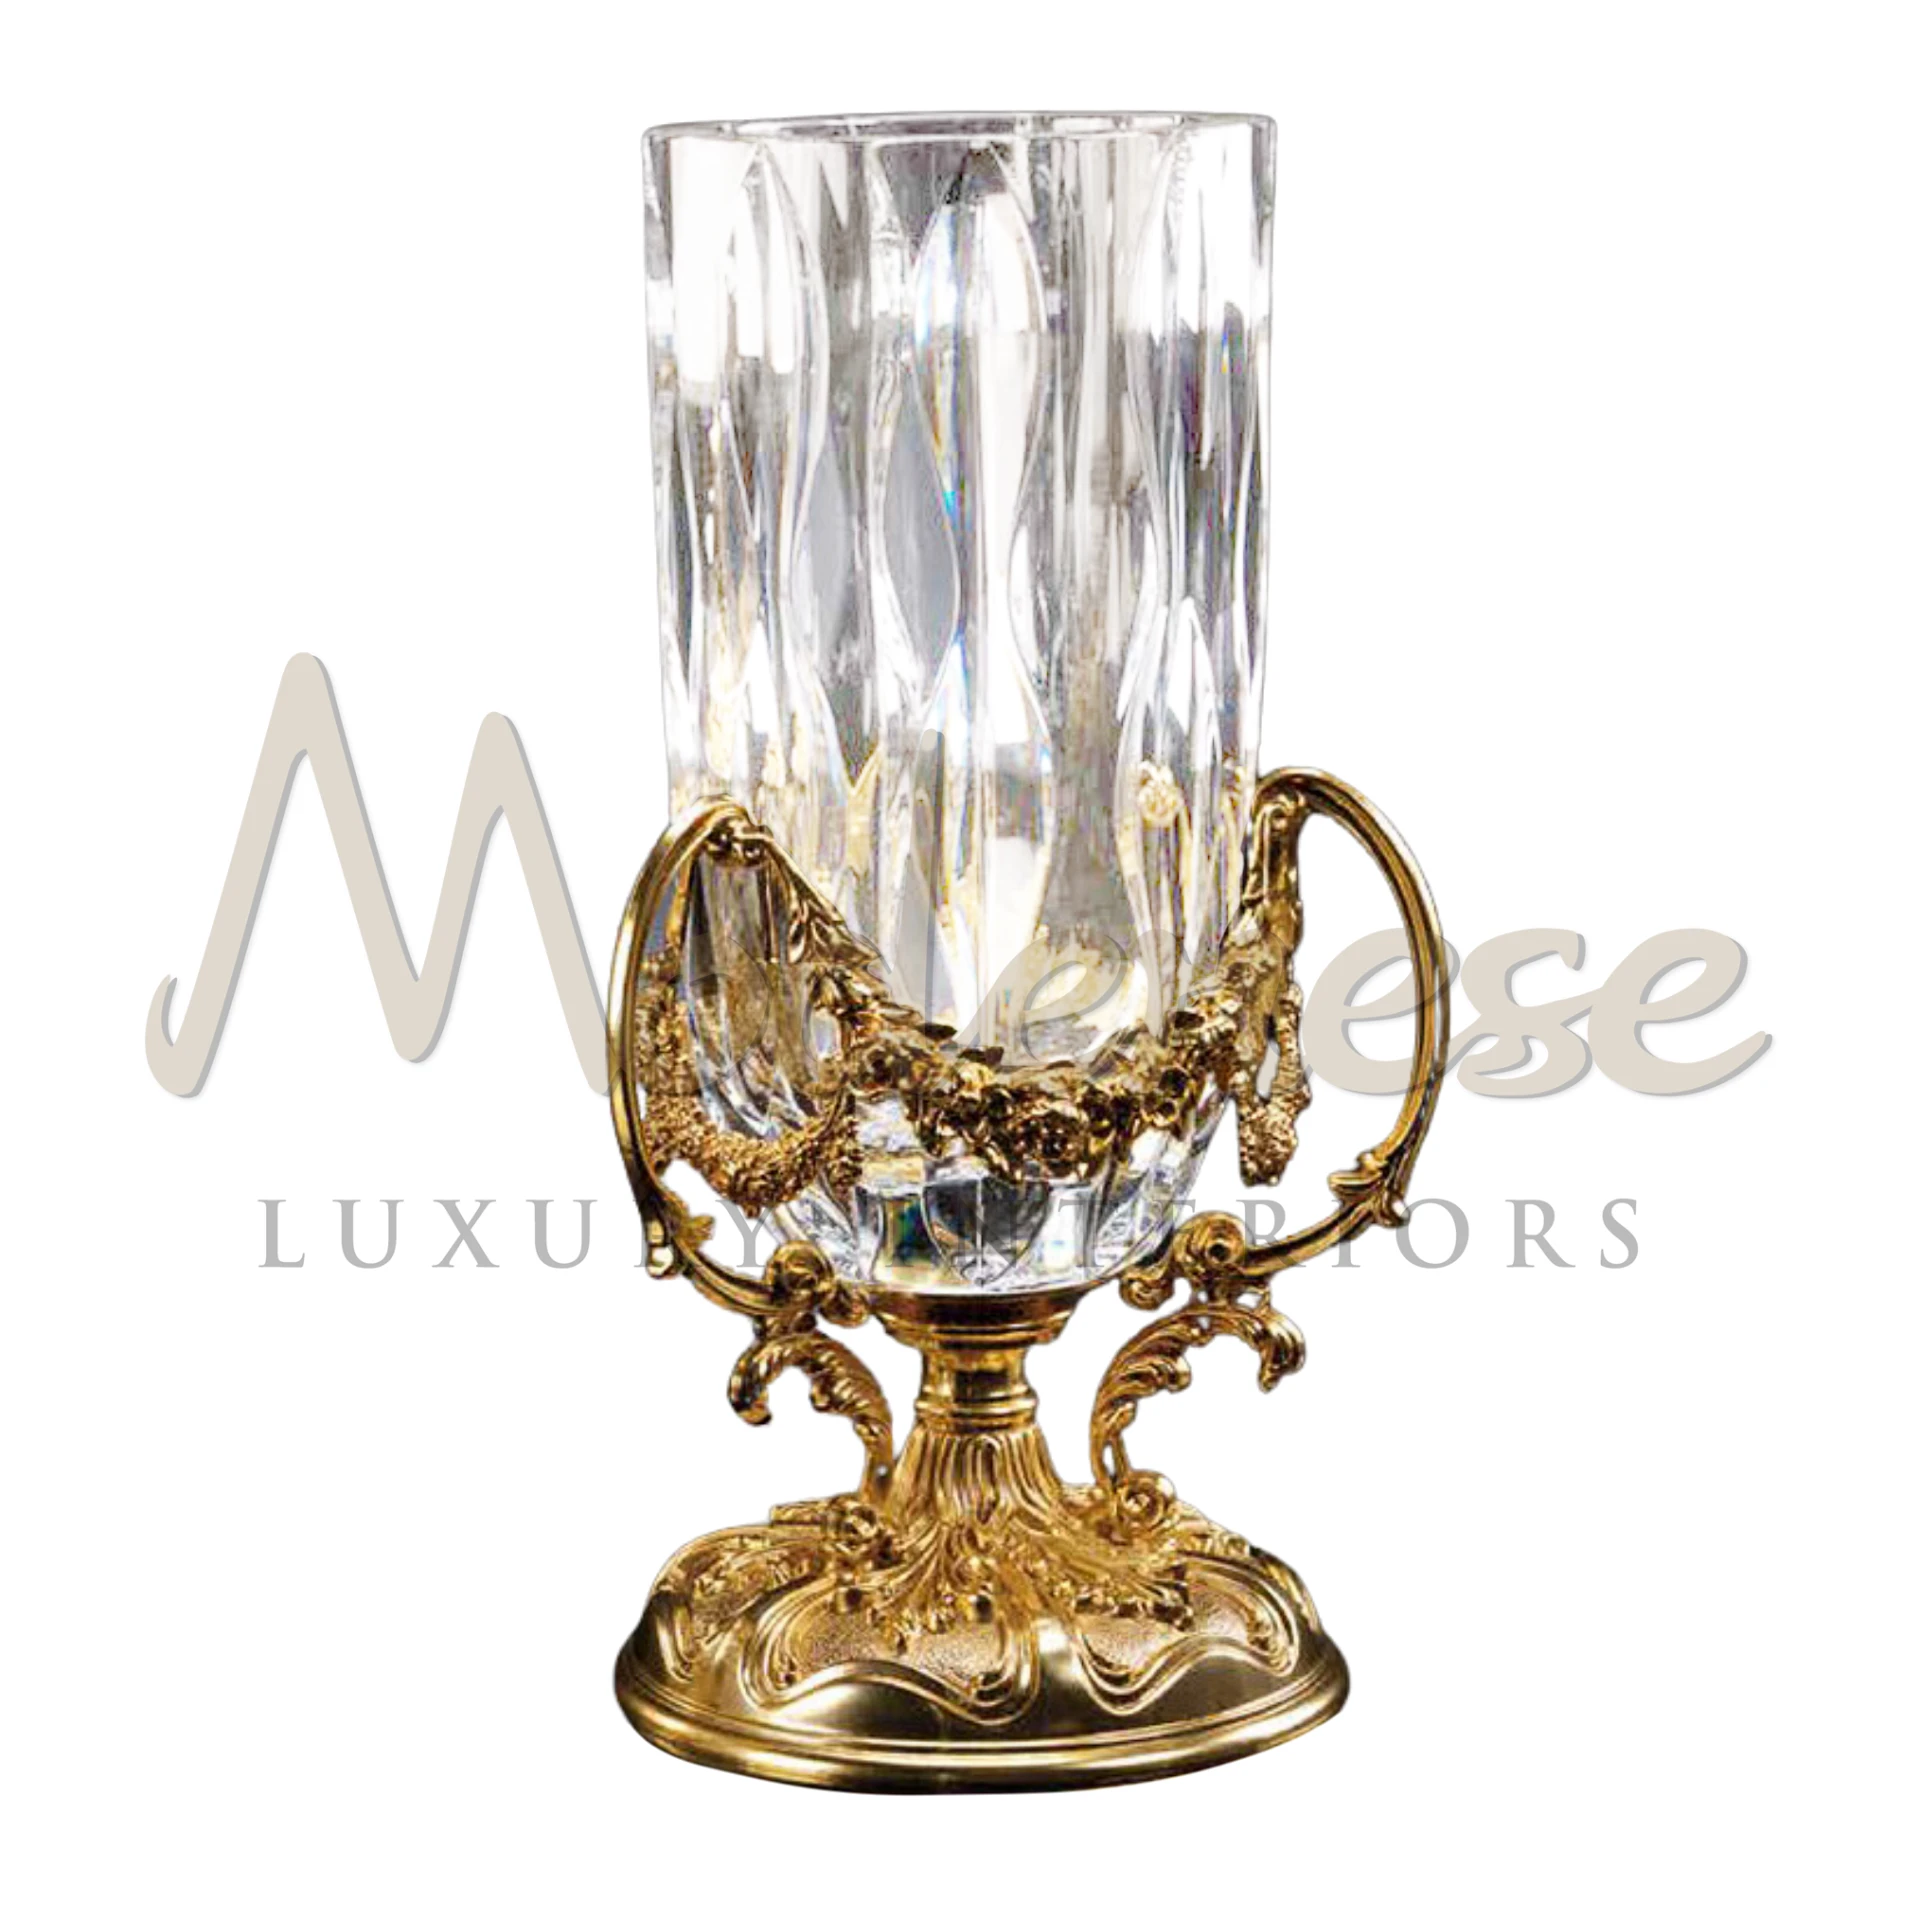 Modenese Rococo Tall Glass Vase, featuring intricate detailing and a unique shape, embodies luxury and elegance from the Rococo period.